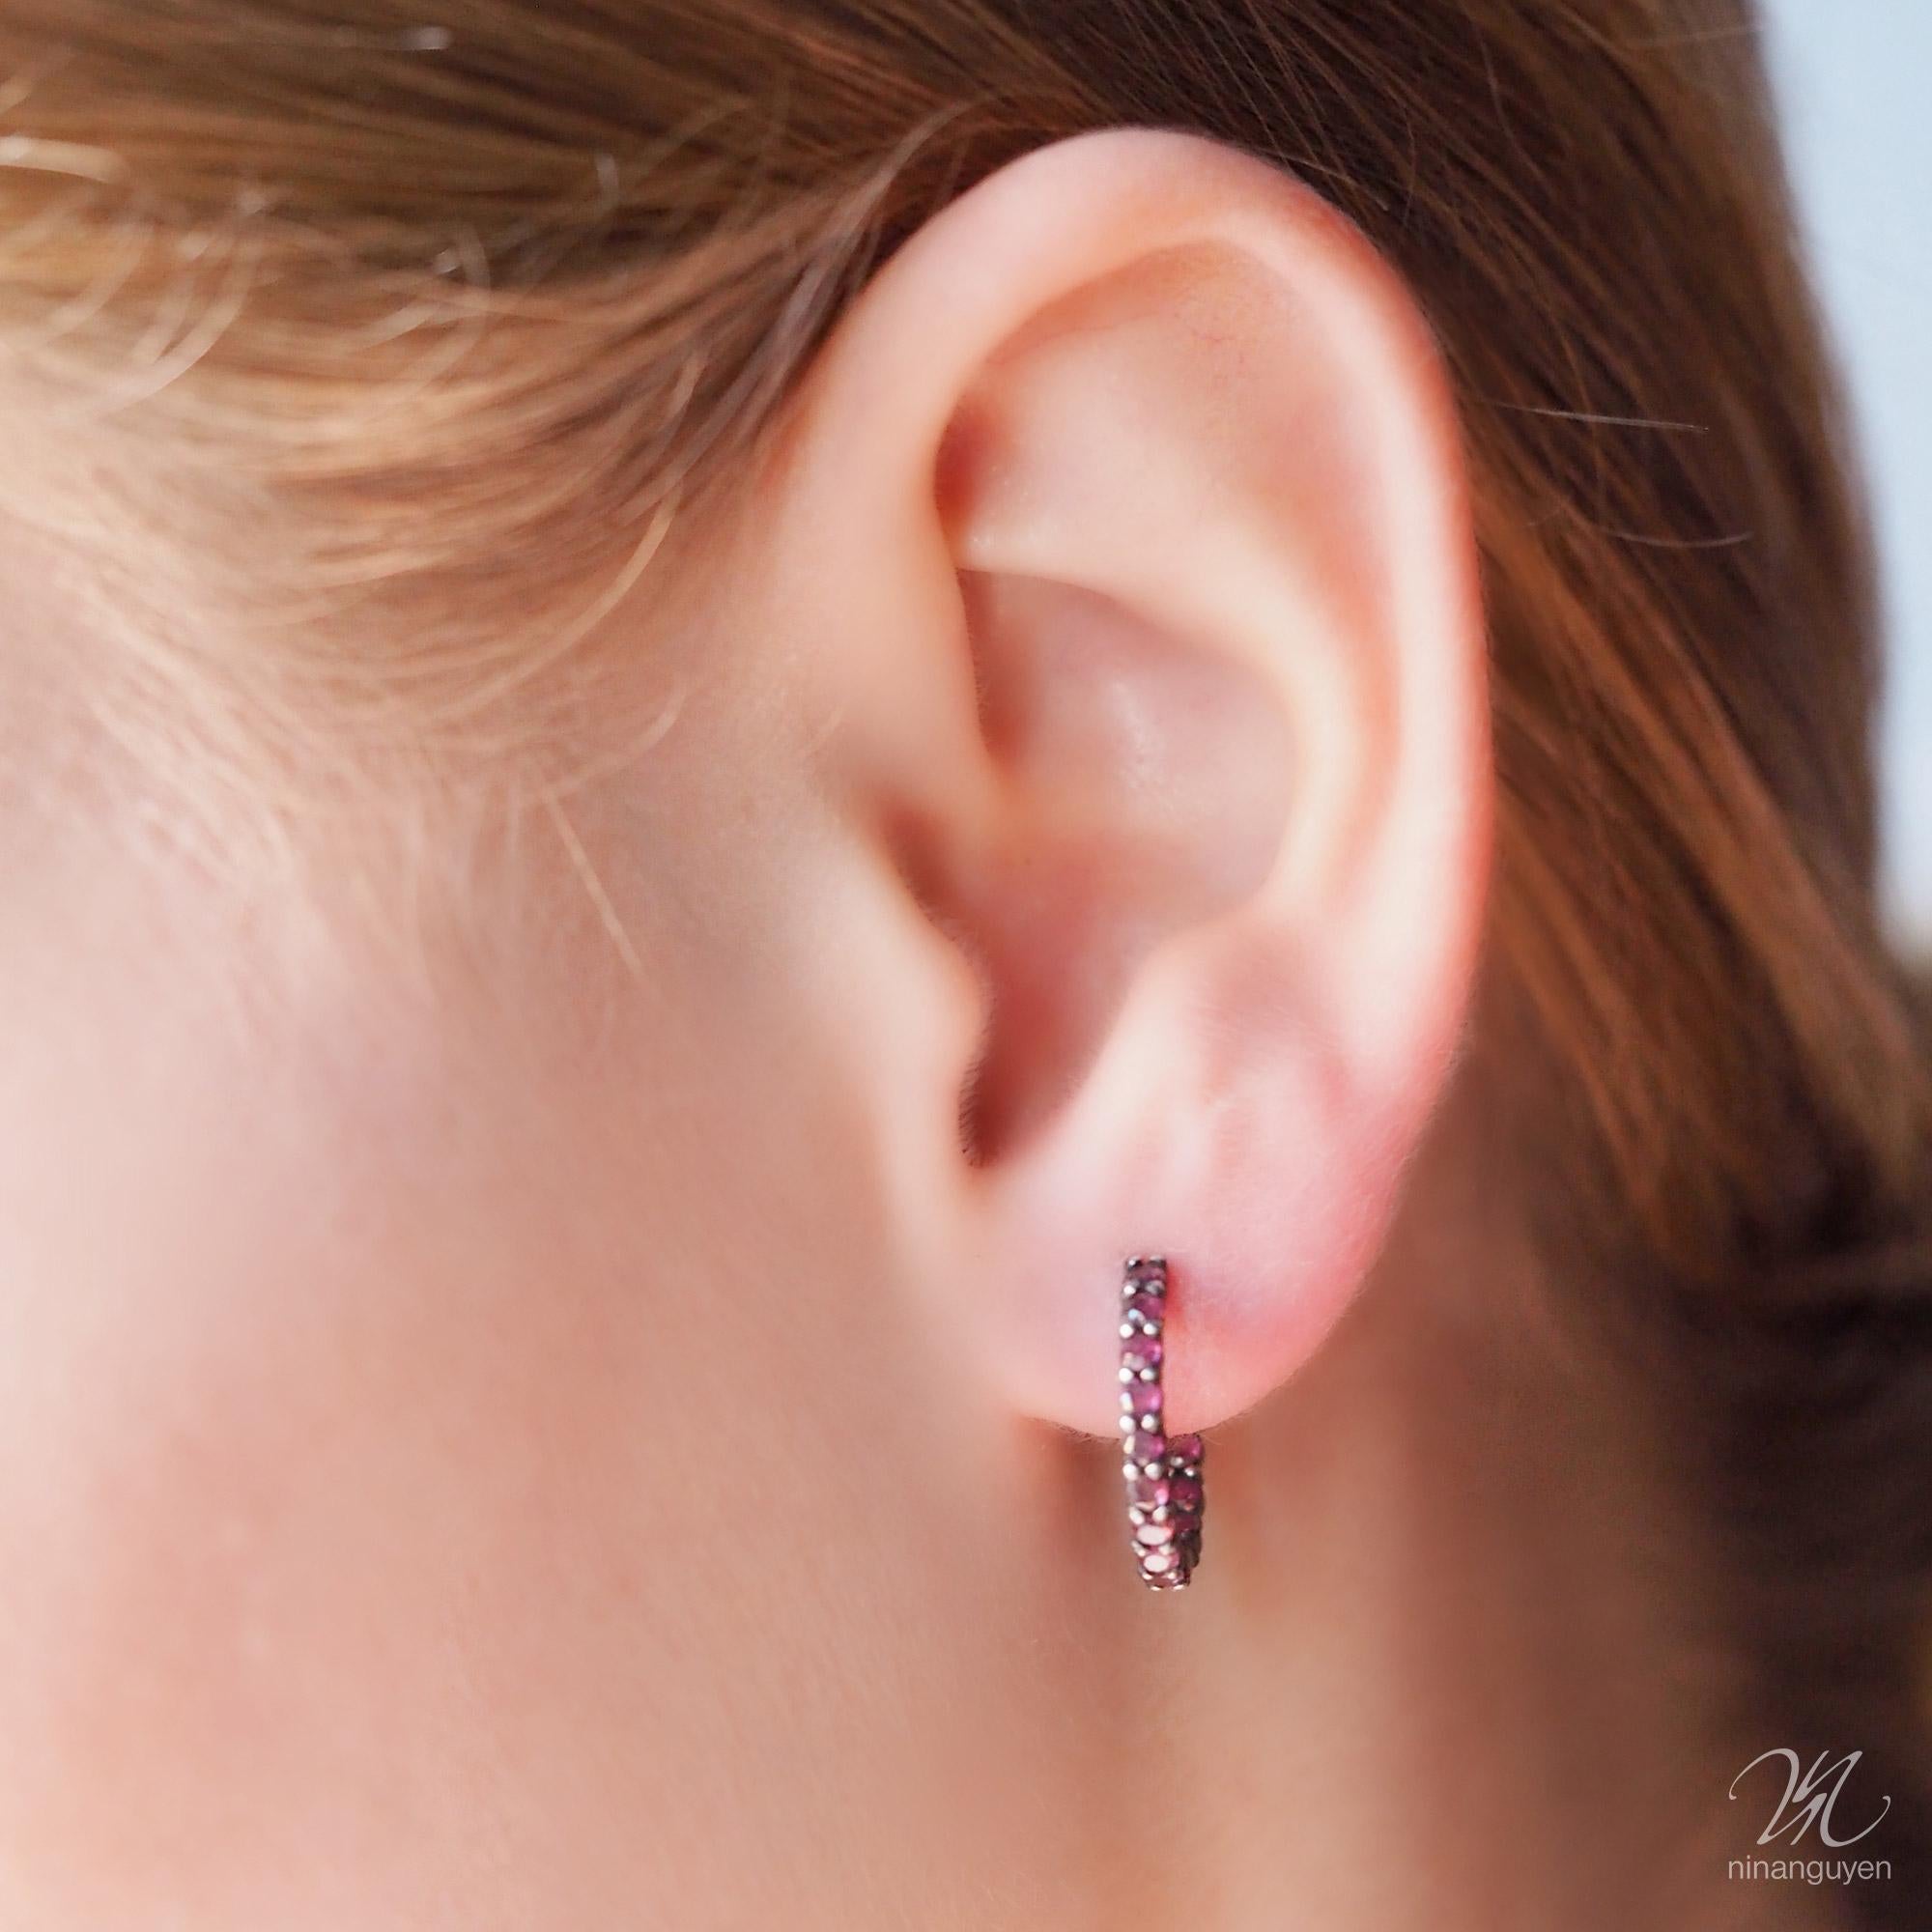 Going spiral: Rubies adorn the inside and outside curves of our Vortex 18mm Gold & Oxidized Hoops, while subtle grooves in the metalwork add a cool graphic edge to the design. 

Stone carat: 1.0
Size: 18mm